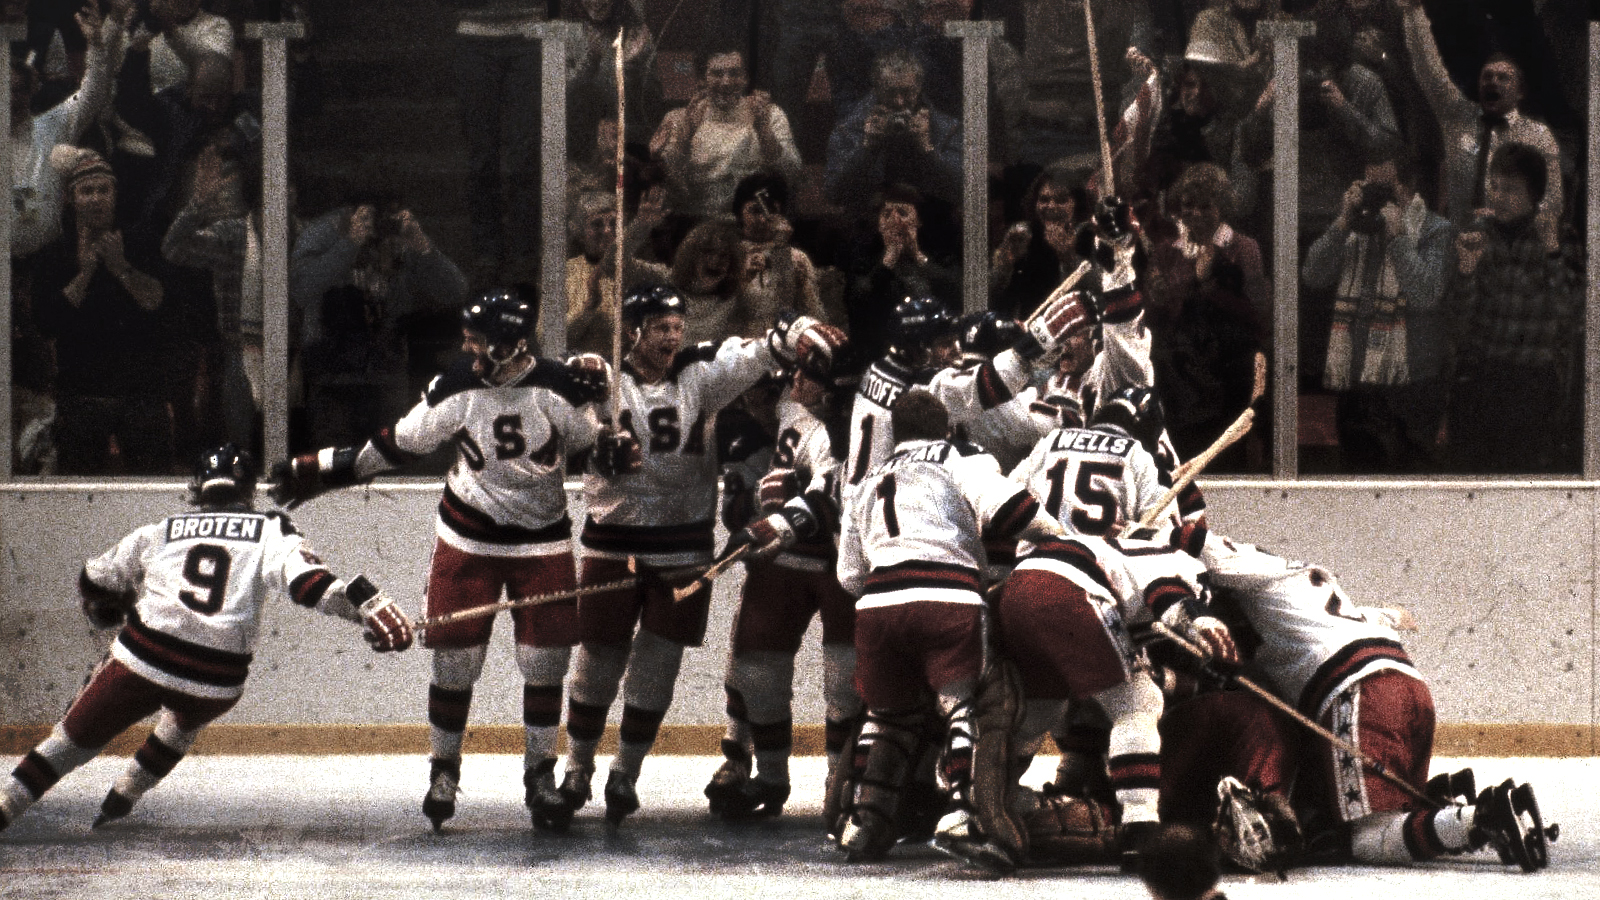 41 years later 'Miracle on Ice' game still matters - The Daily Goal Horn